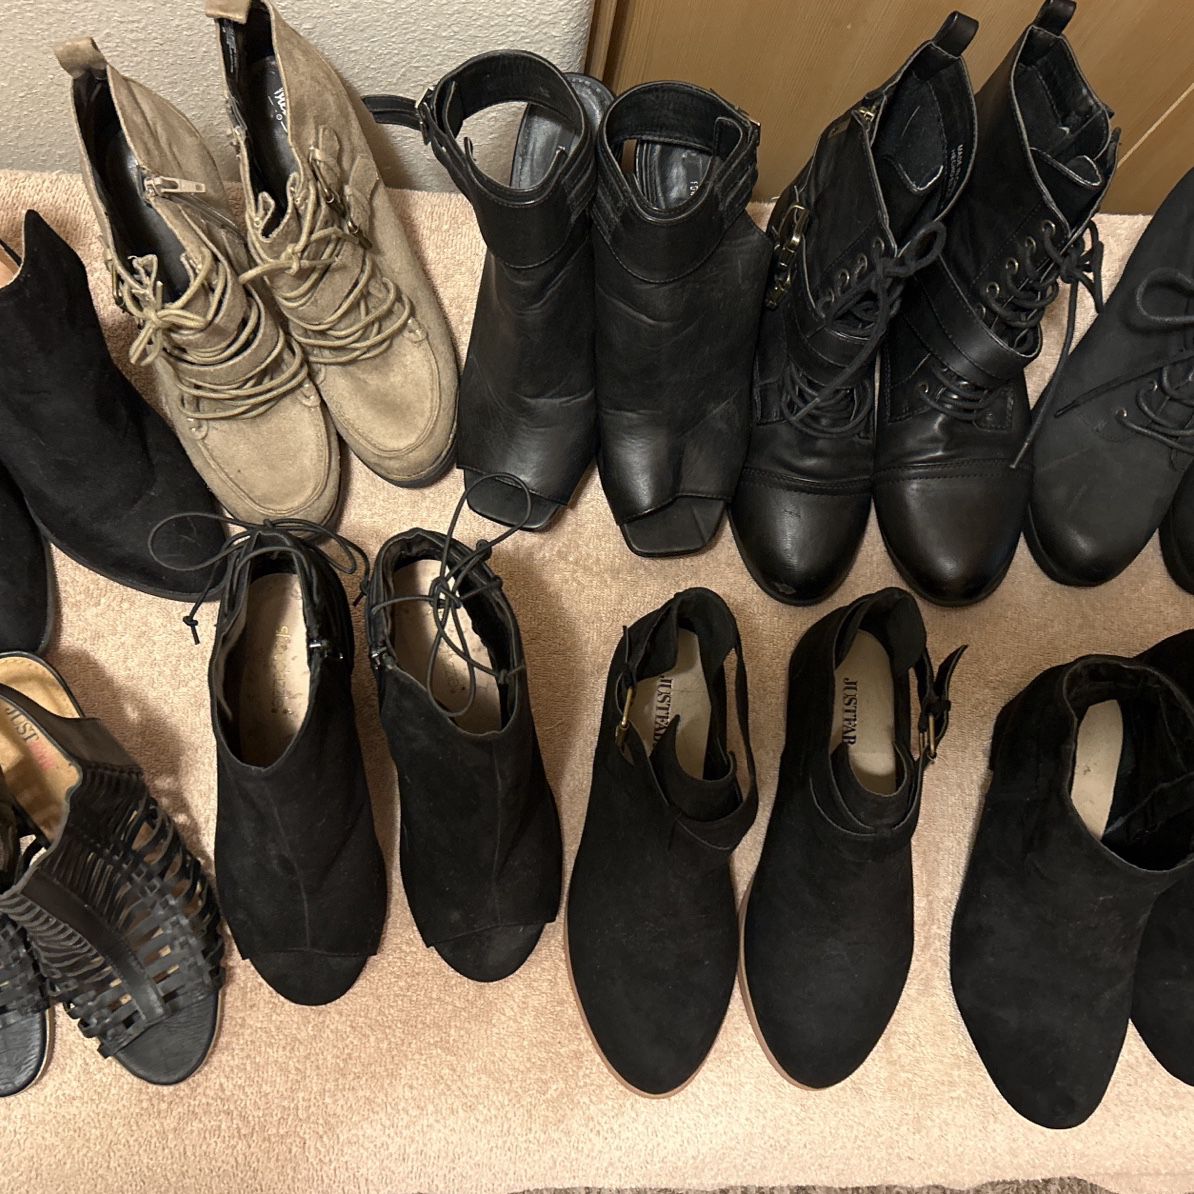 9 Pairs Of Shoe Size 9. Eight Pairs Of Black & One Pair Of Tan. Mostly heeled, some boot style, Some velvet.